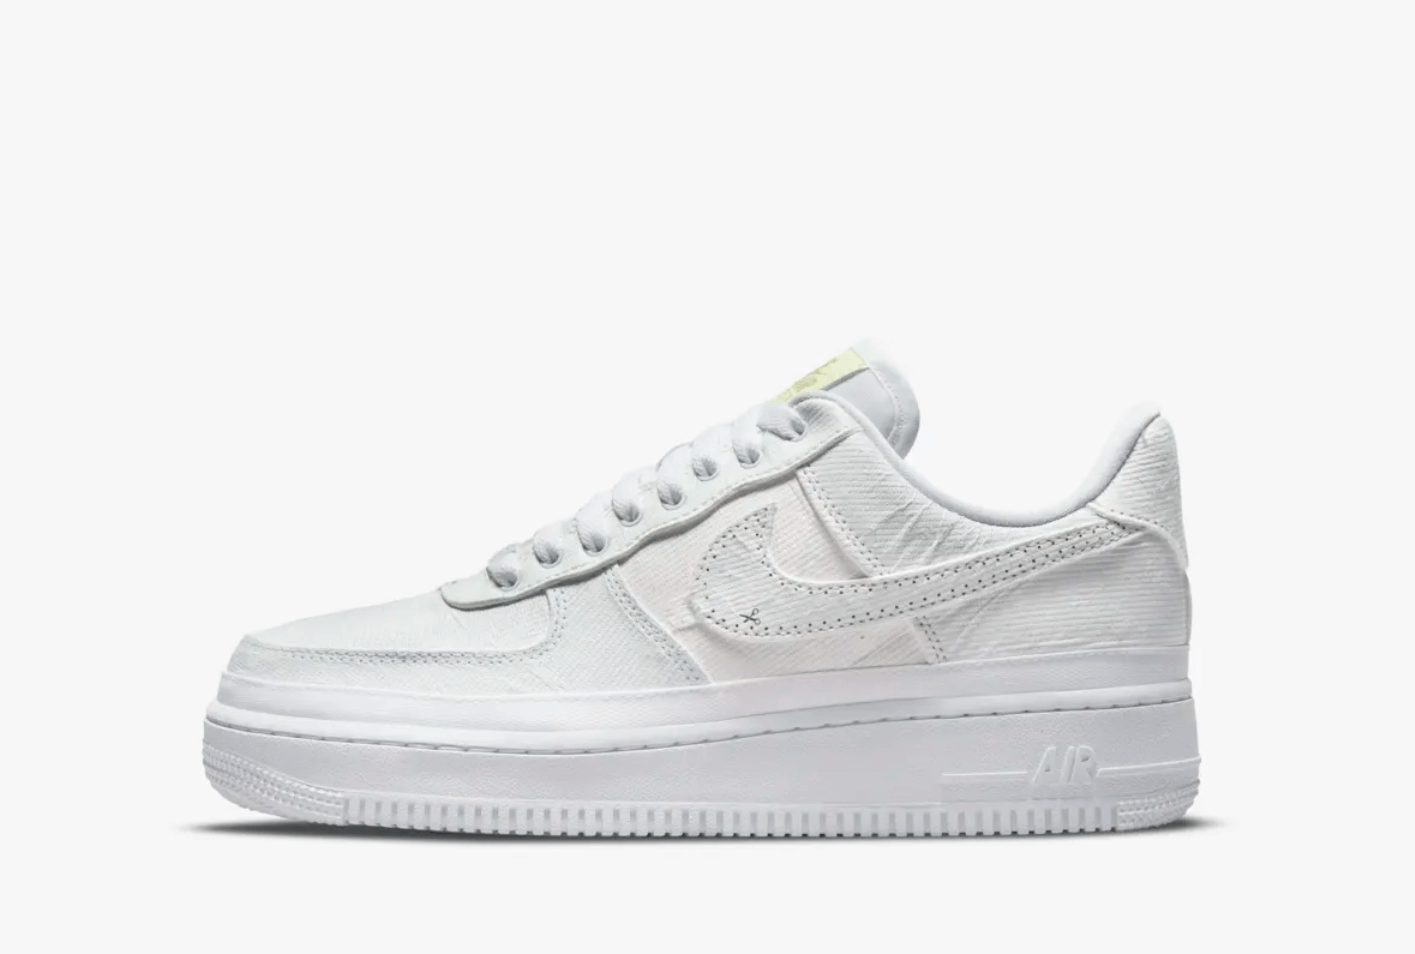 🥇Nike Air Force 1 PASTEL REVEAL +TOP TOP+ | zapatillasysneakers.com قمقوم قهوه